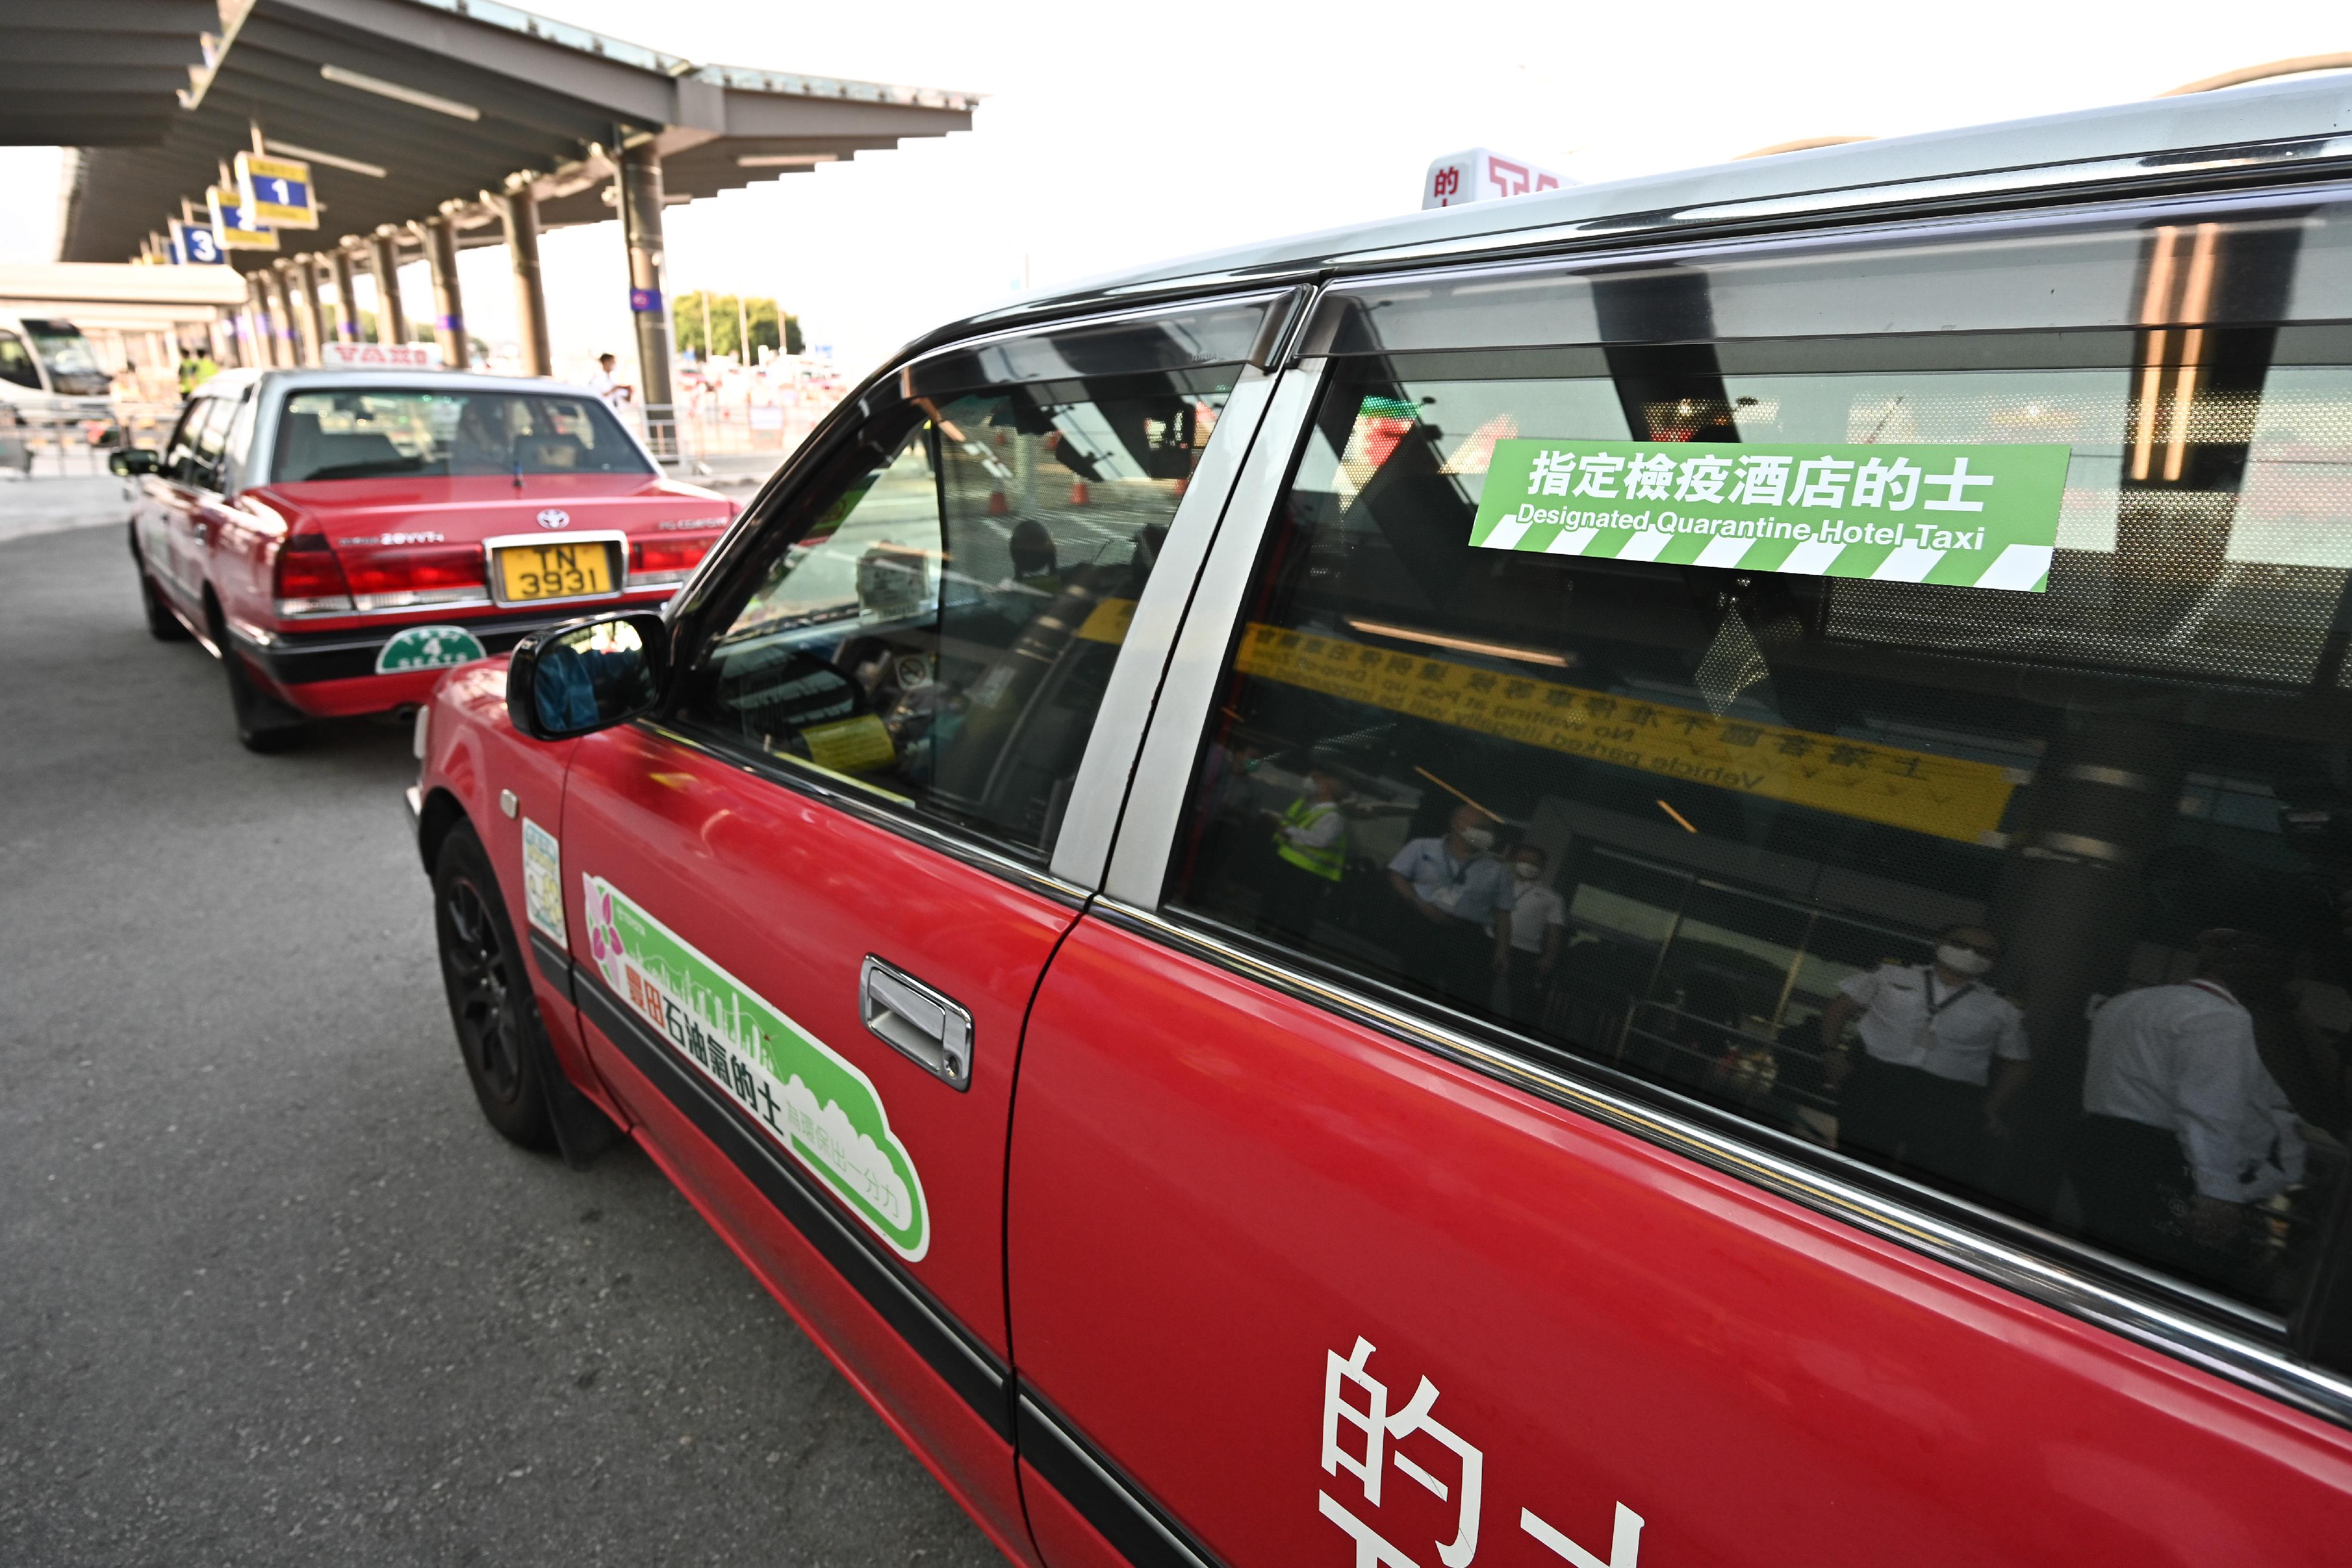 With the co-ordination of the Transport and Logistics Bureau, the taxi trade has arranged 100 taxis to provide transport services for inbound persons from Hong Kong International Airport to designated quarantine hotels (DQHs) on a trial basis from today (July 25). Photo shows DQH taxis.